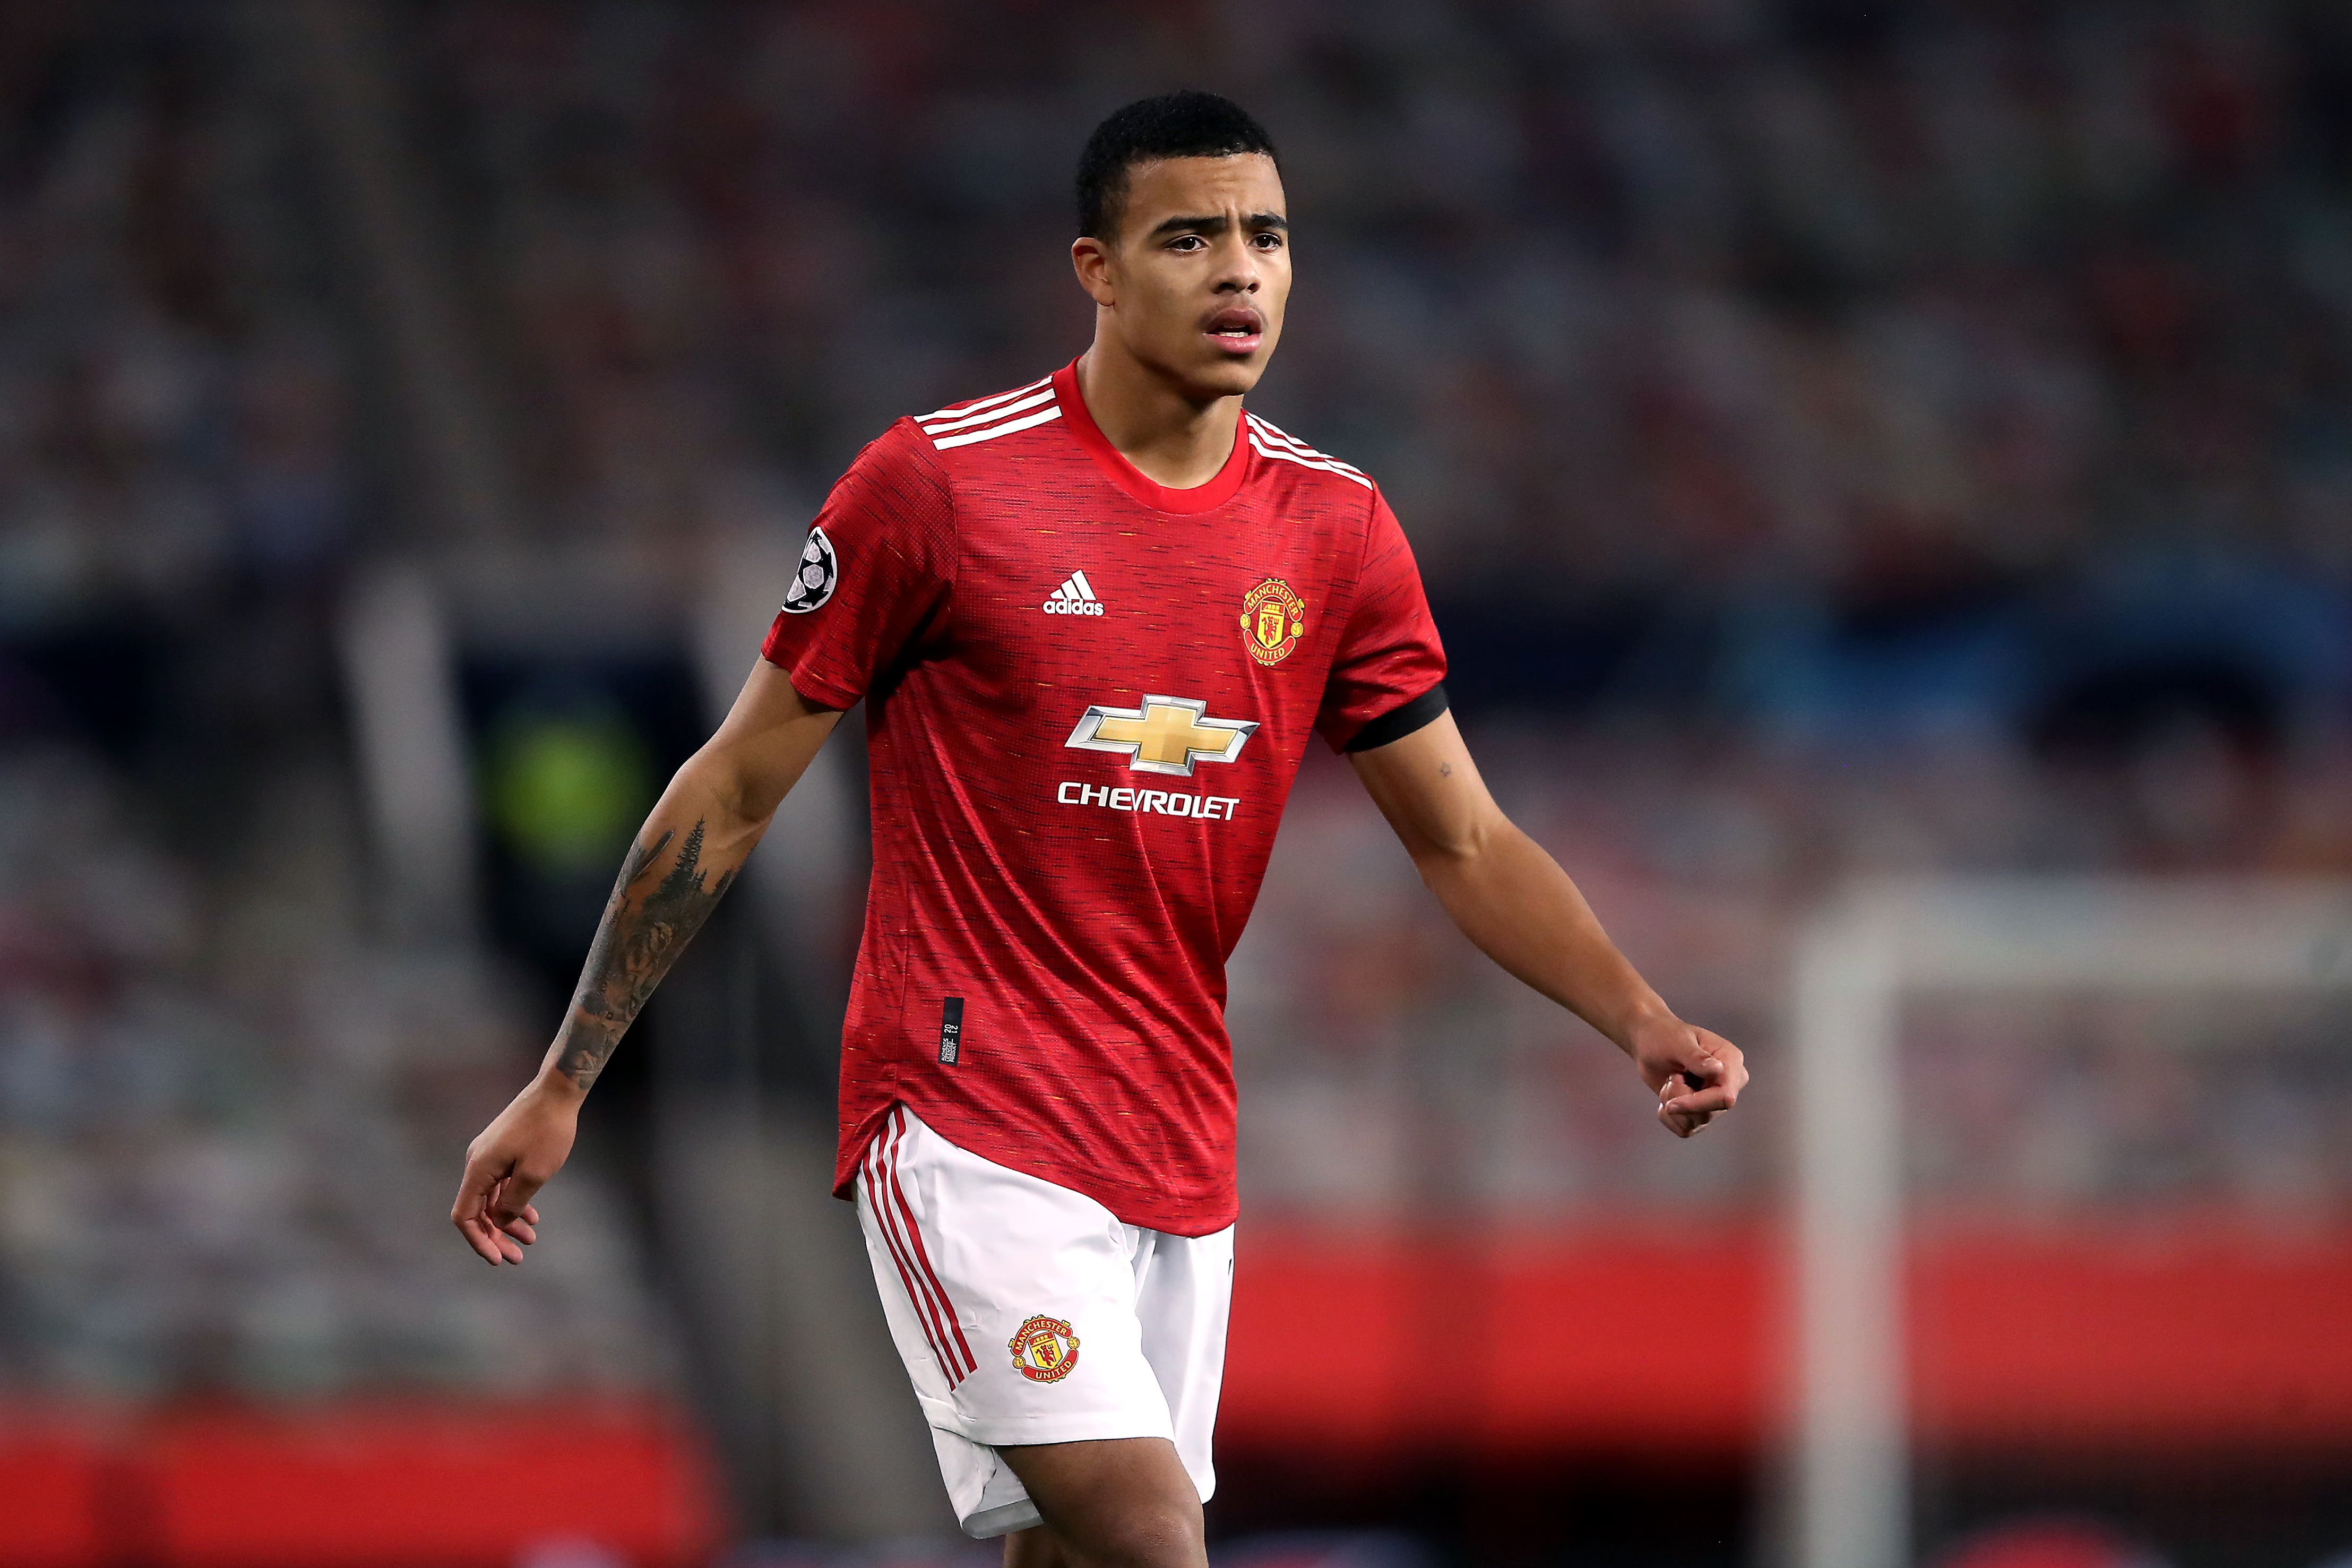 Mason Greenwood was top class at Manchester United.